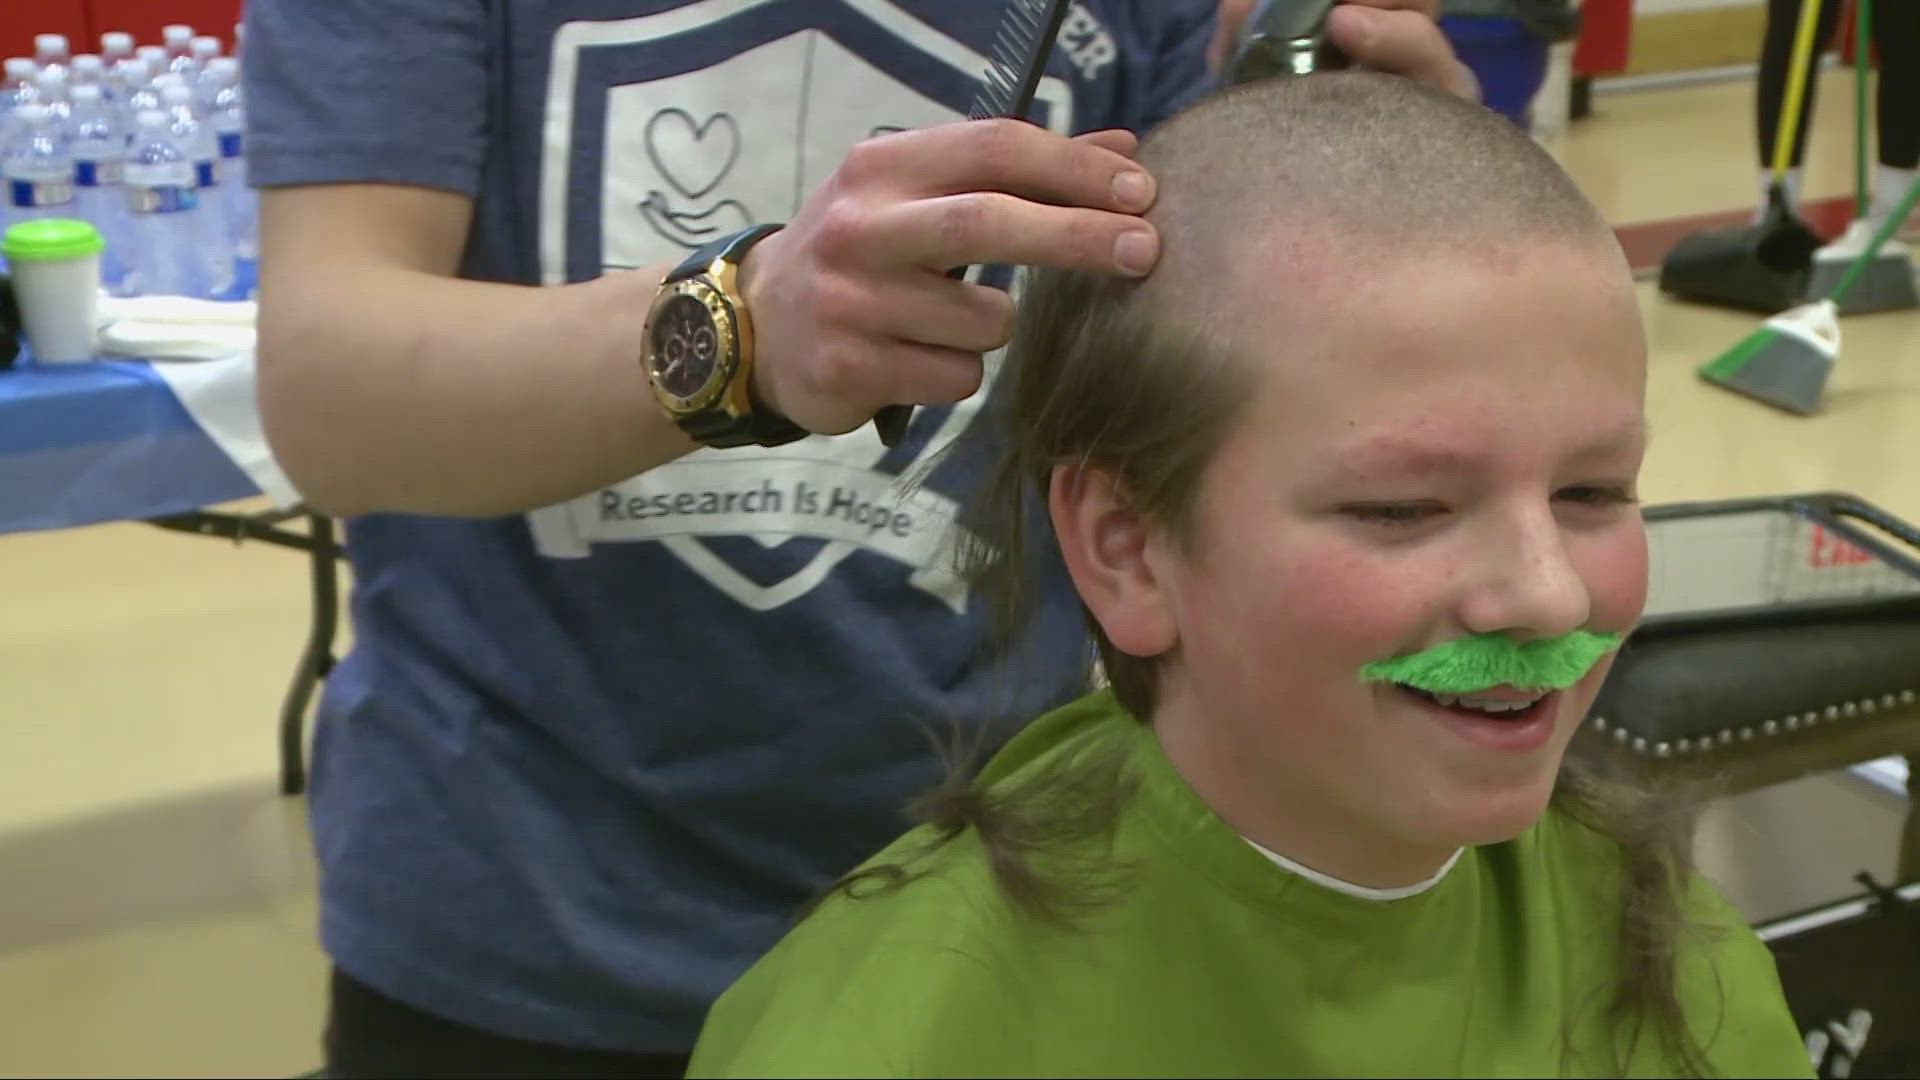 The head-shaving event drew nearly 100 people at the school.